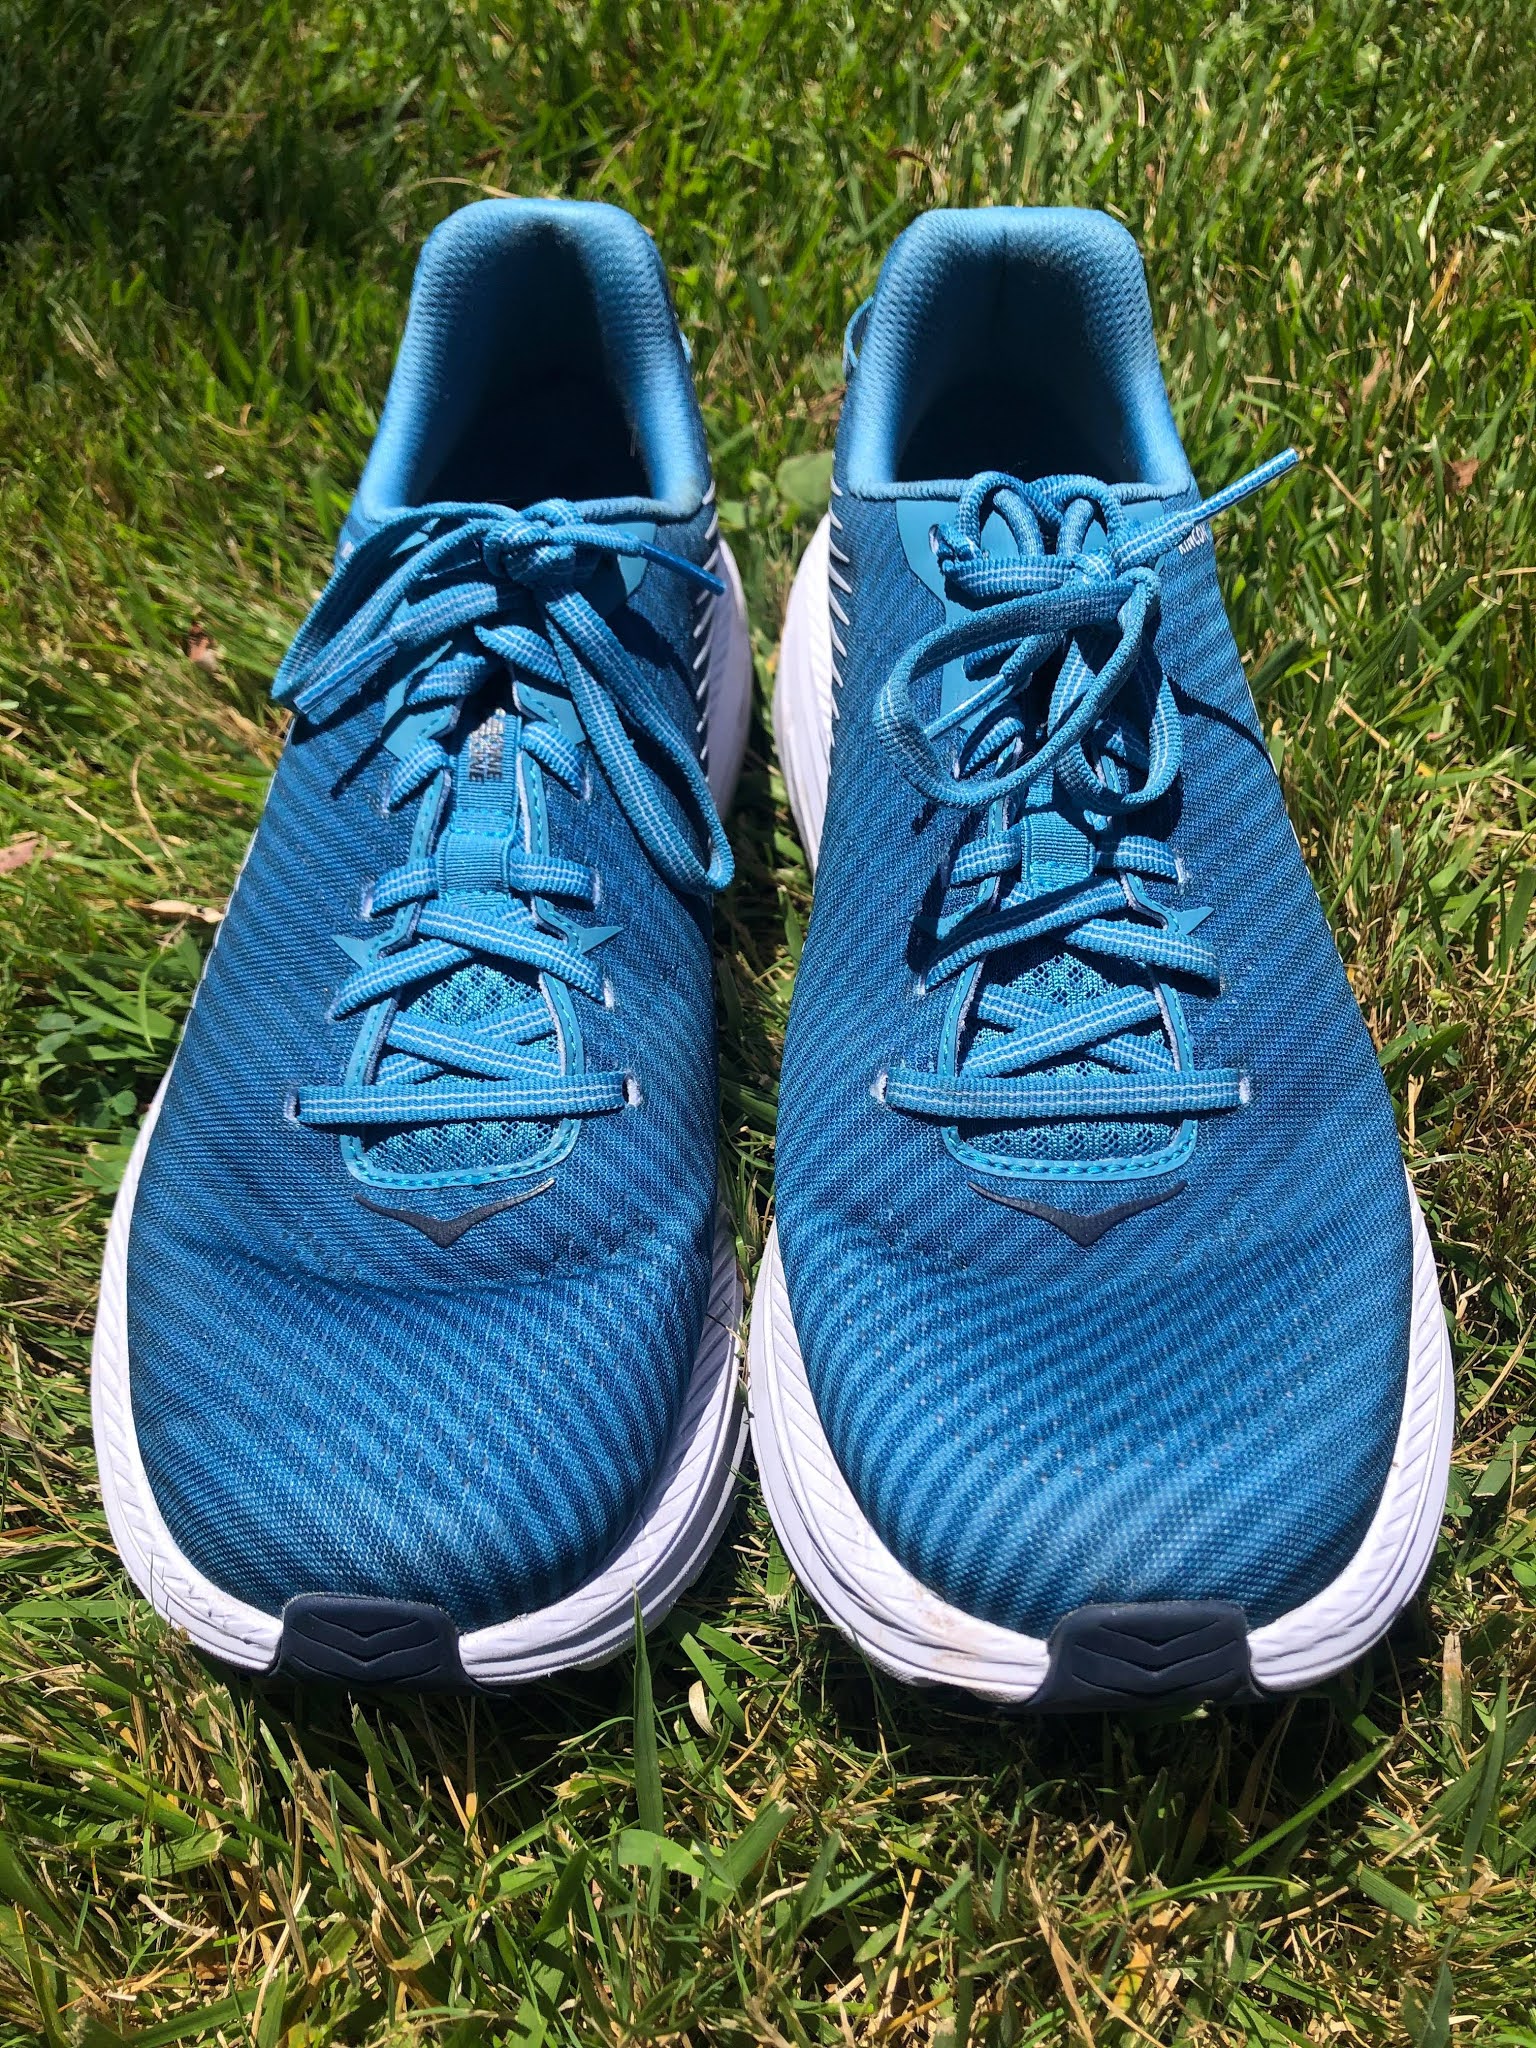 Hoka Rincon 2 Multiple Tester Review - DOCTORS OF RUNNING